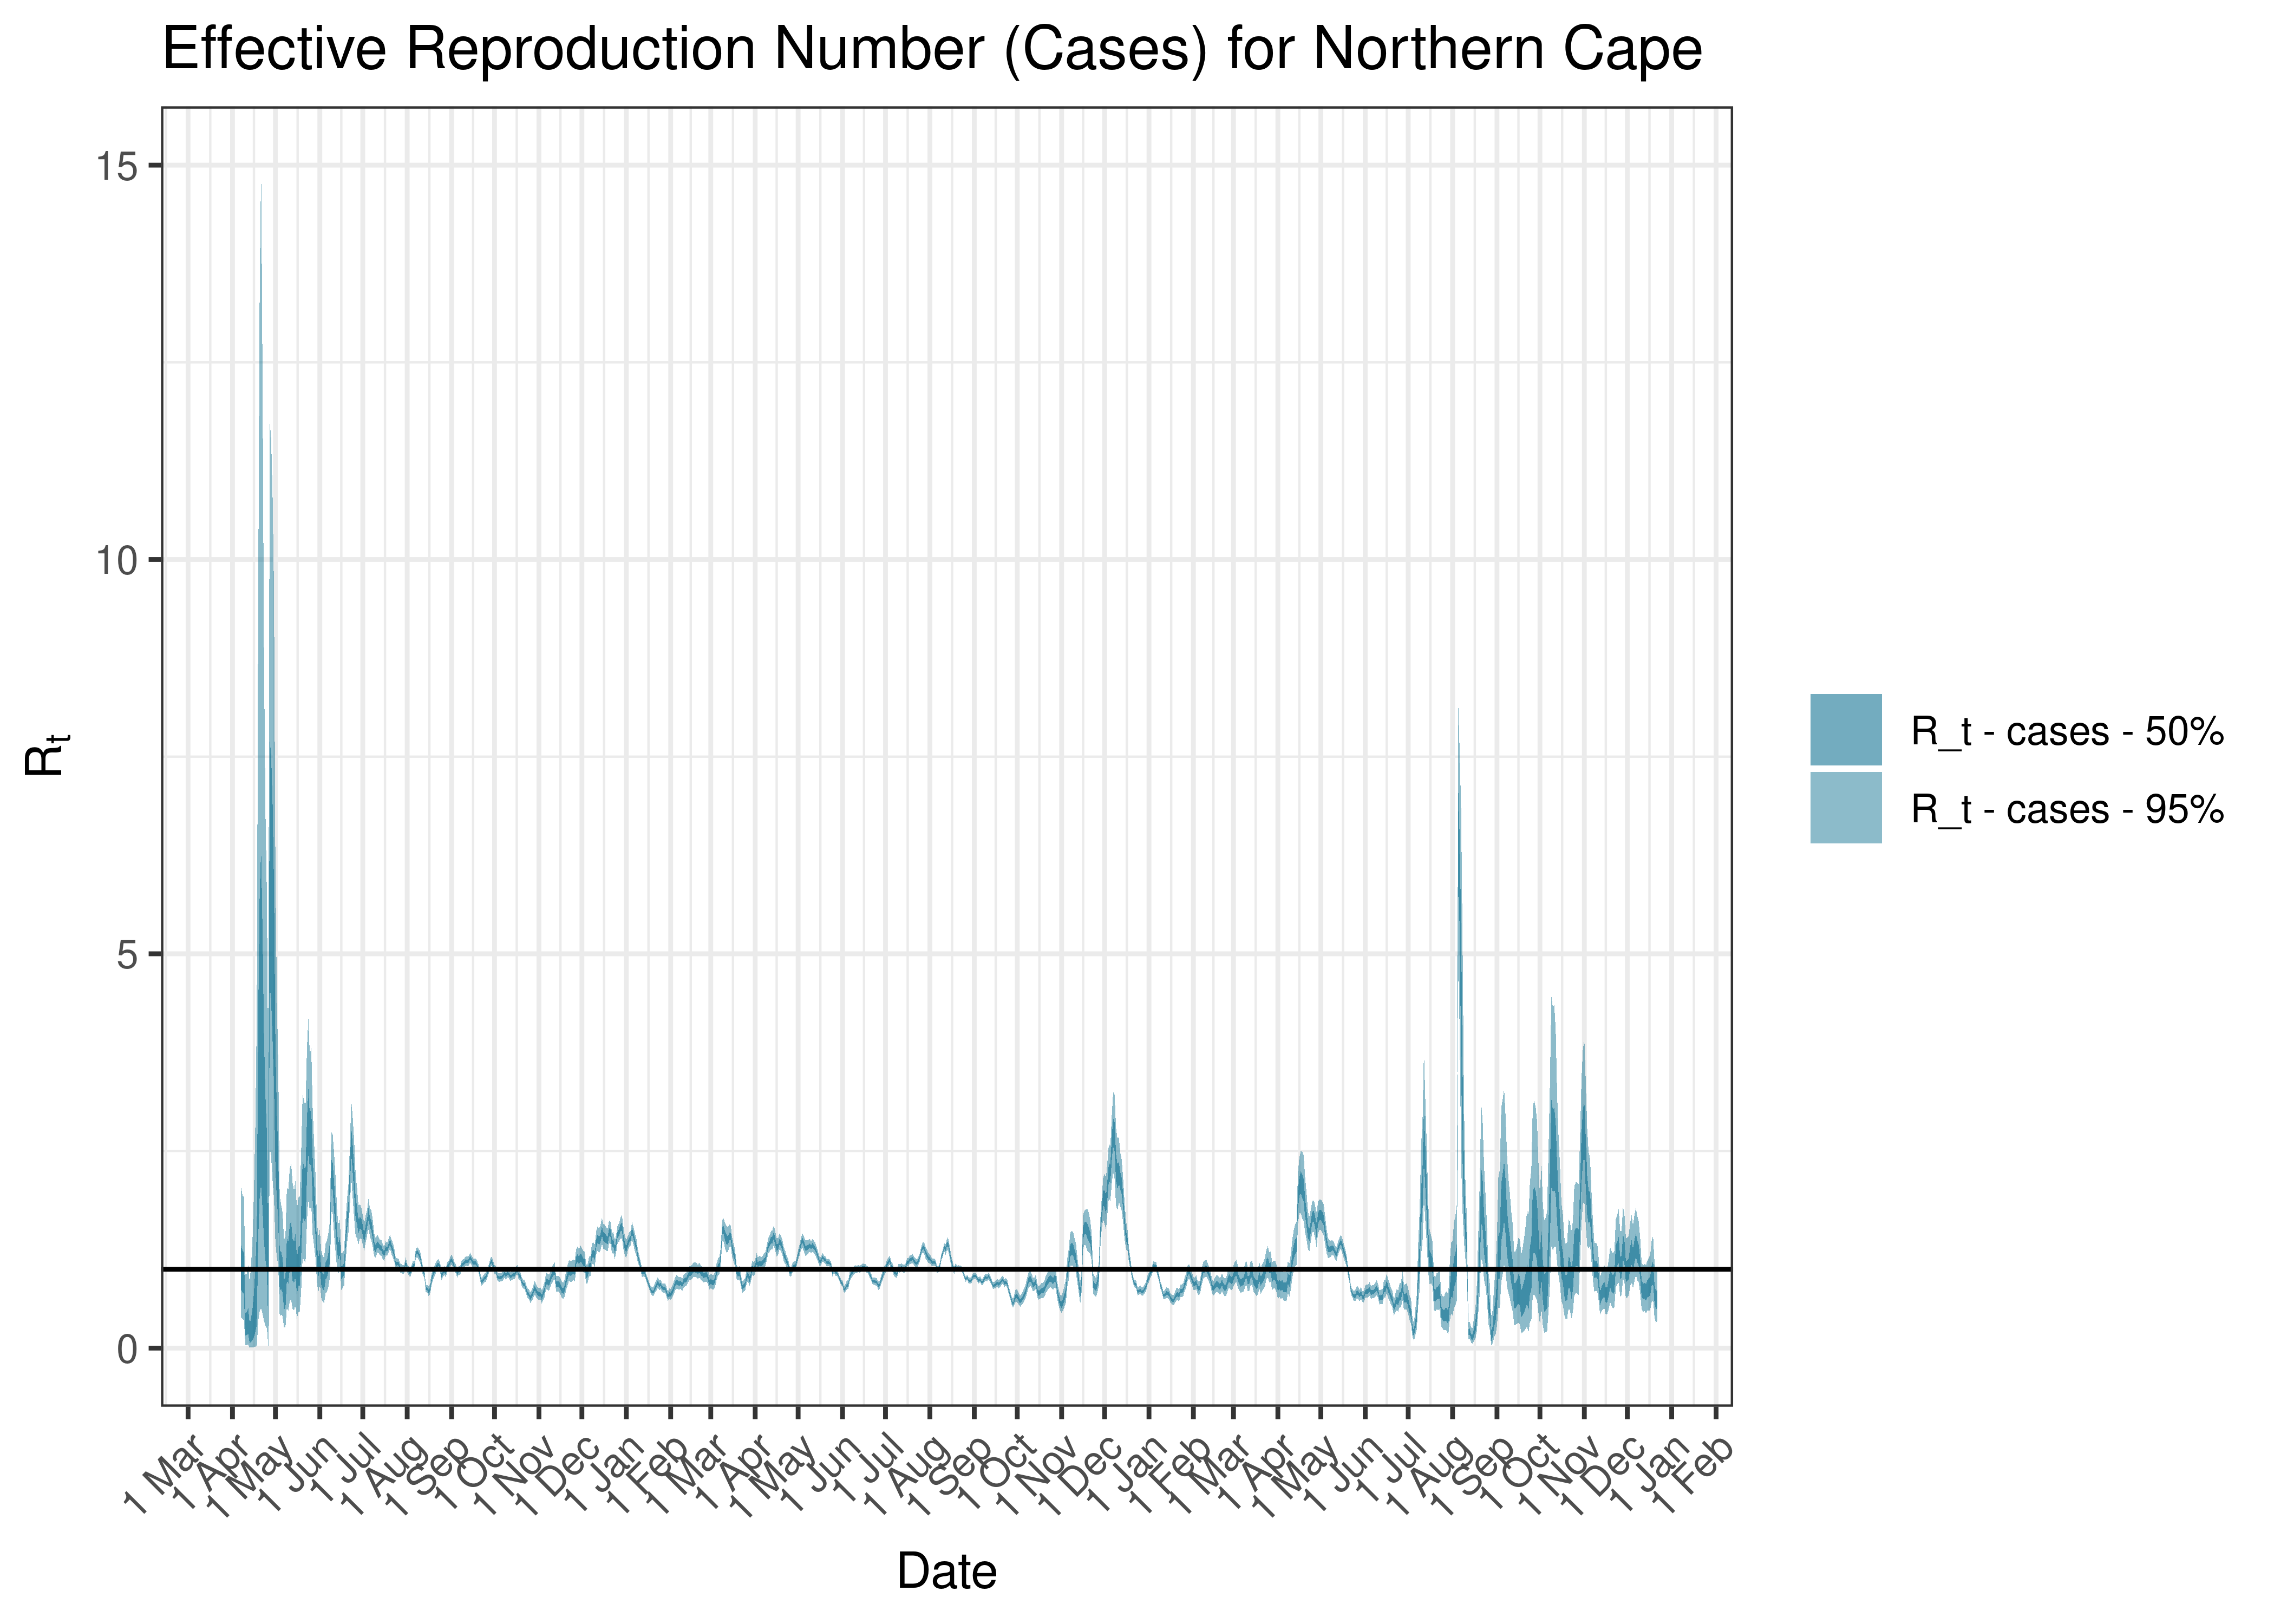 Estimated Effective Reproduction Number Based on Cases for Northern Cape since 1 April 2020